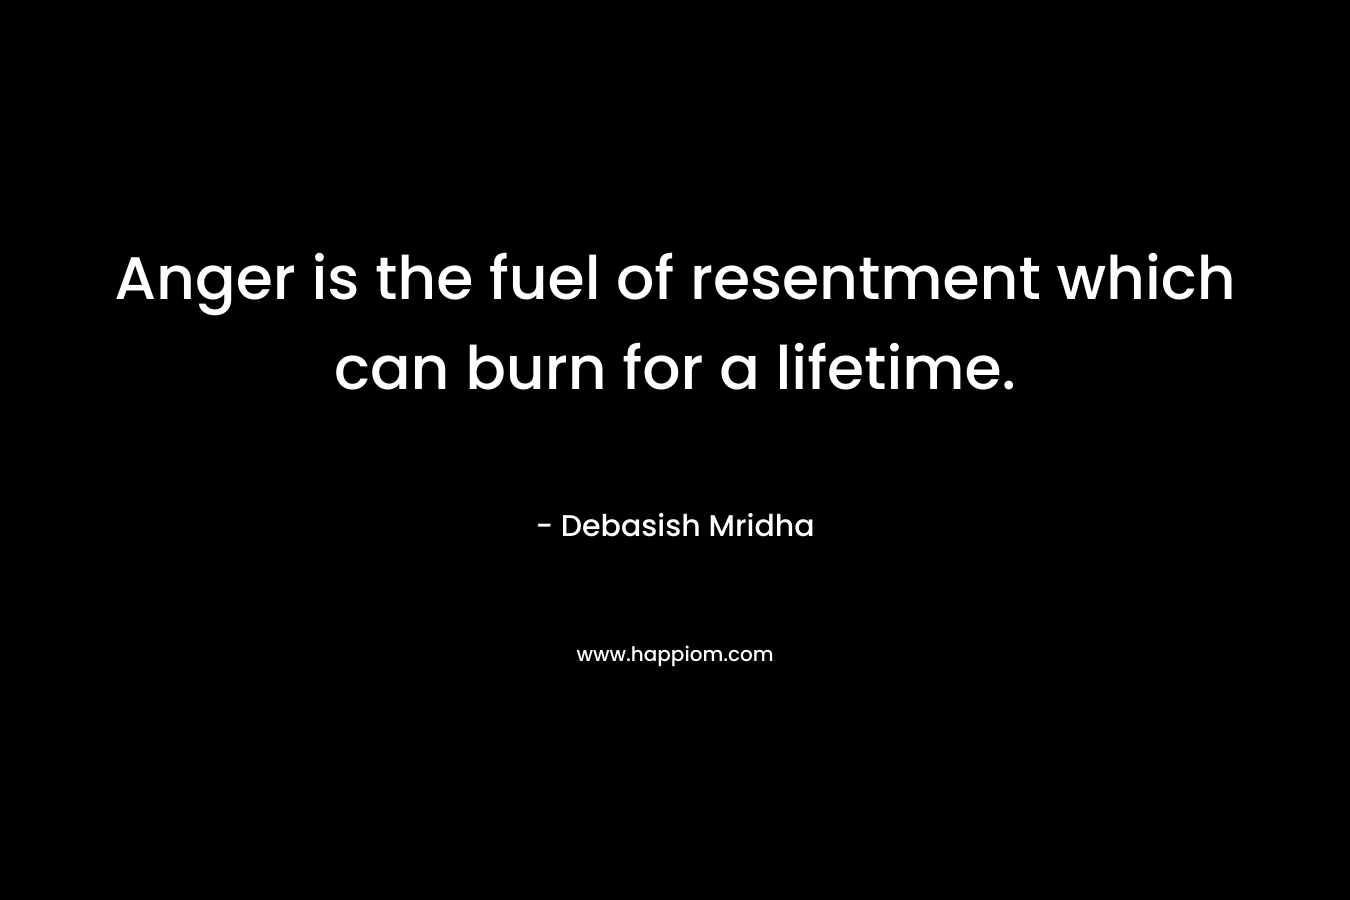 Anger is the fuel of resentment which can burn for a lifetime.